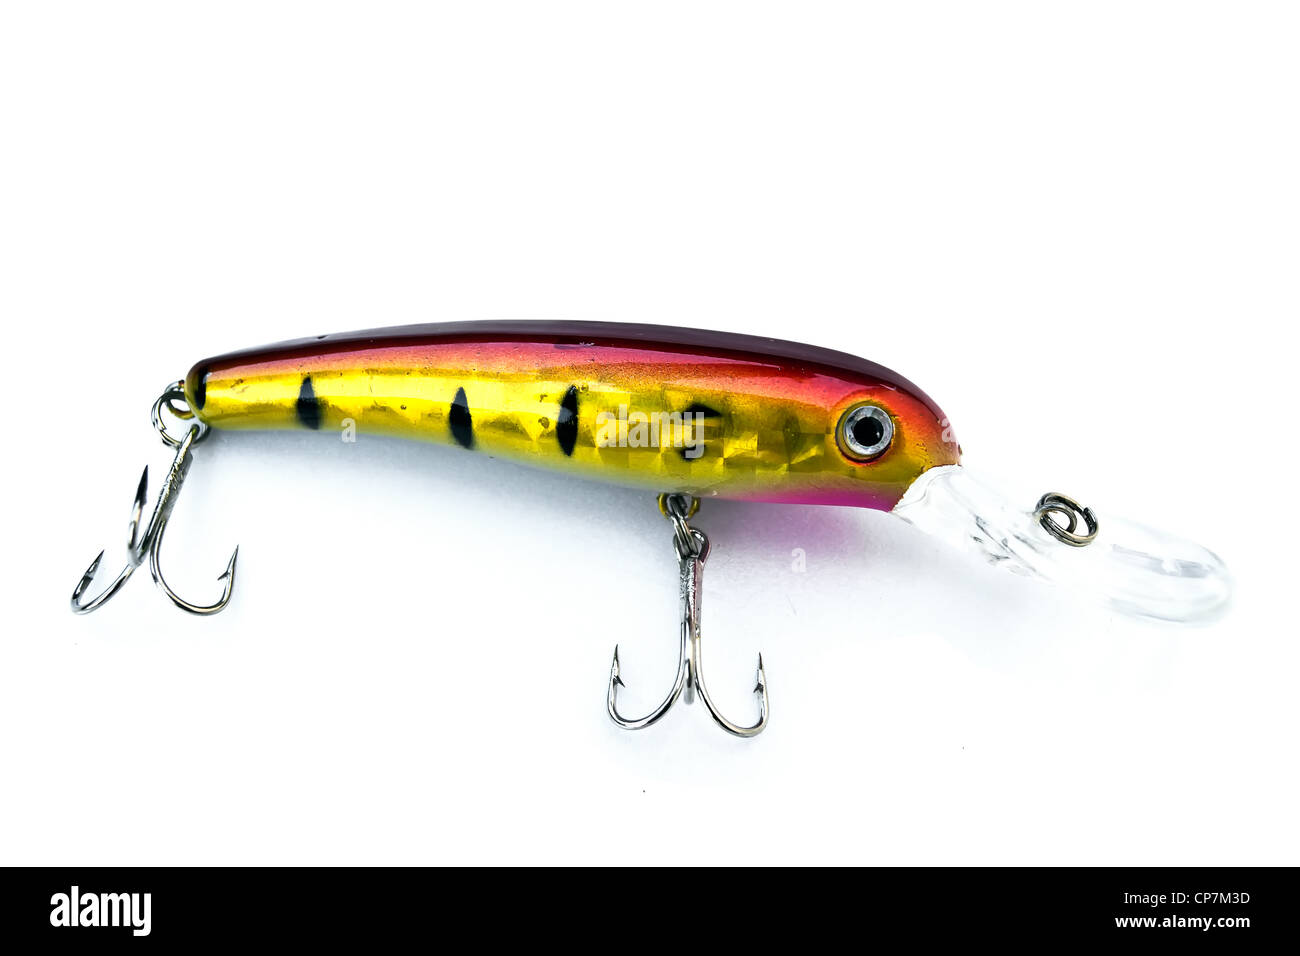 Fishing lure - Wobbler on a white background Stock Photo